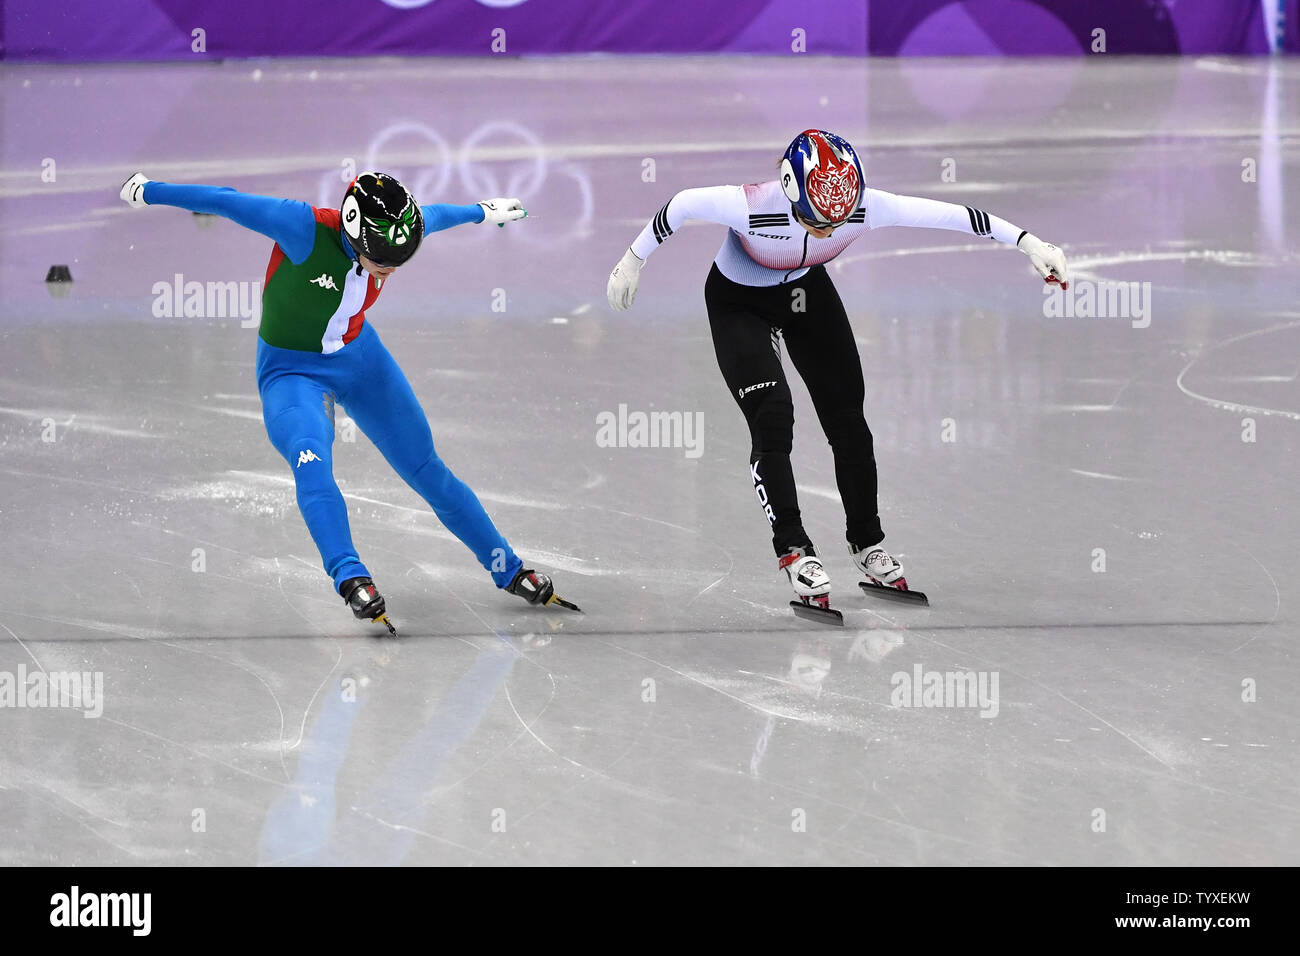 Arianna Fontana of Italy and Minjeong Choi of Korea cross the line in a  photo finish in the finals of the Ladies' 500m Short Track Speed Skating  event during the Pyeongchang 2018